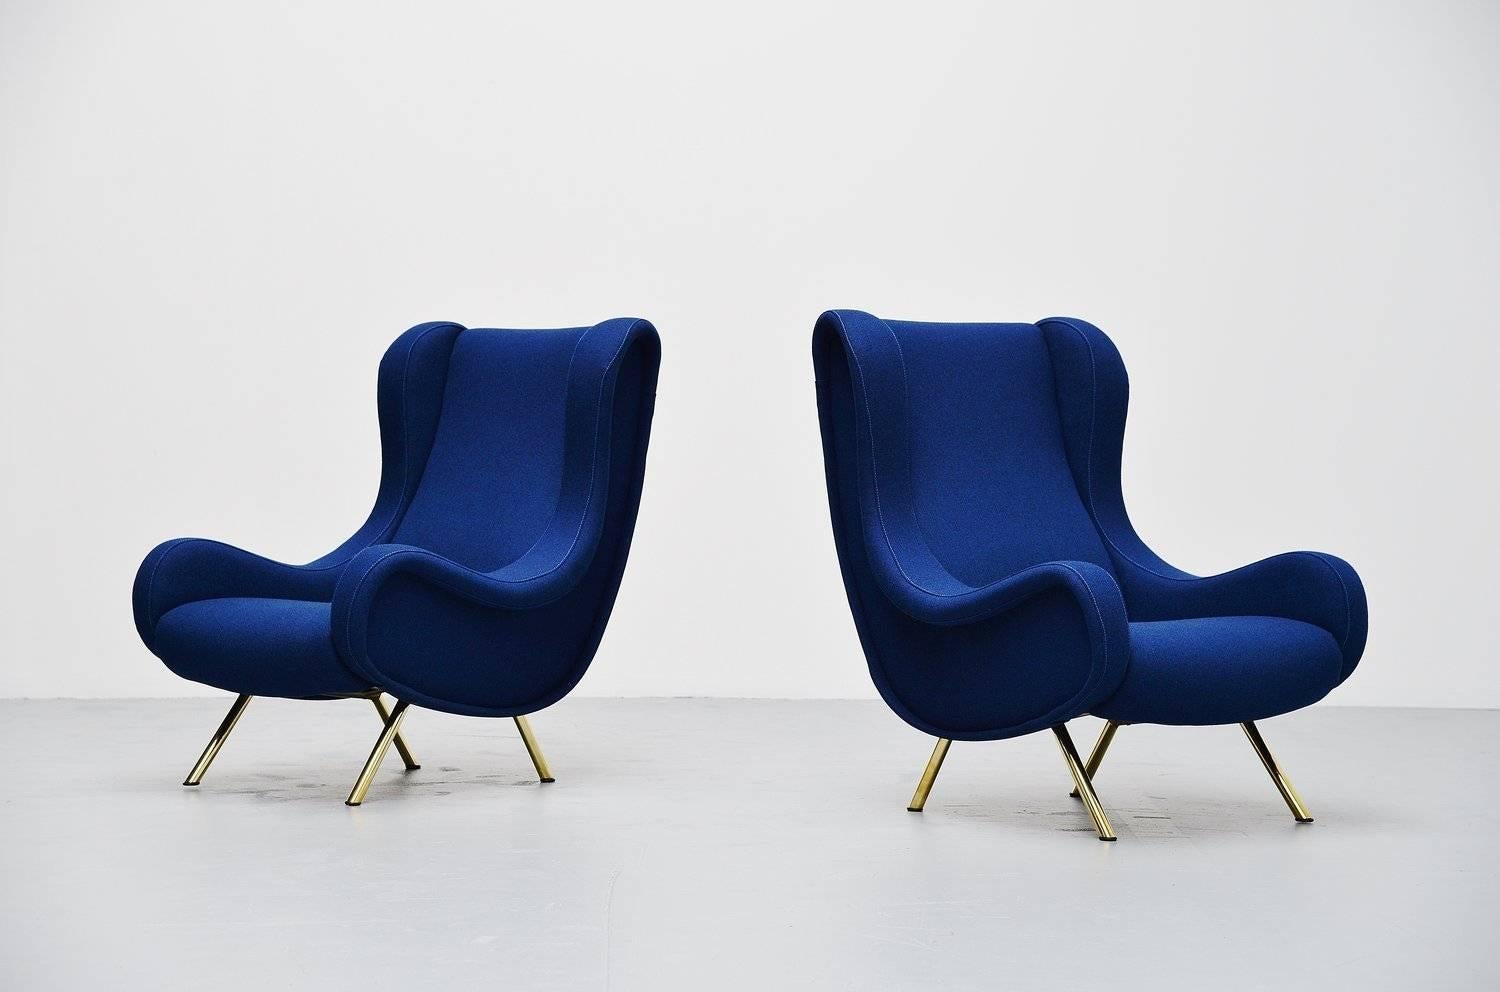 Fantastic iconic lounge chair set designed by world known designer Marco Zanuso for Arflex, Italy 1951. These two lounge chairs are newly upholstered with Tonica 751 fabric by Kvadrat and is upholstered like its supposed to and we used the best